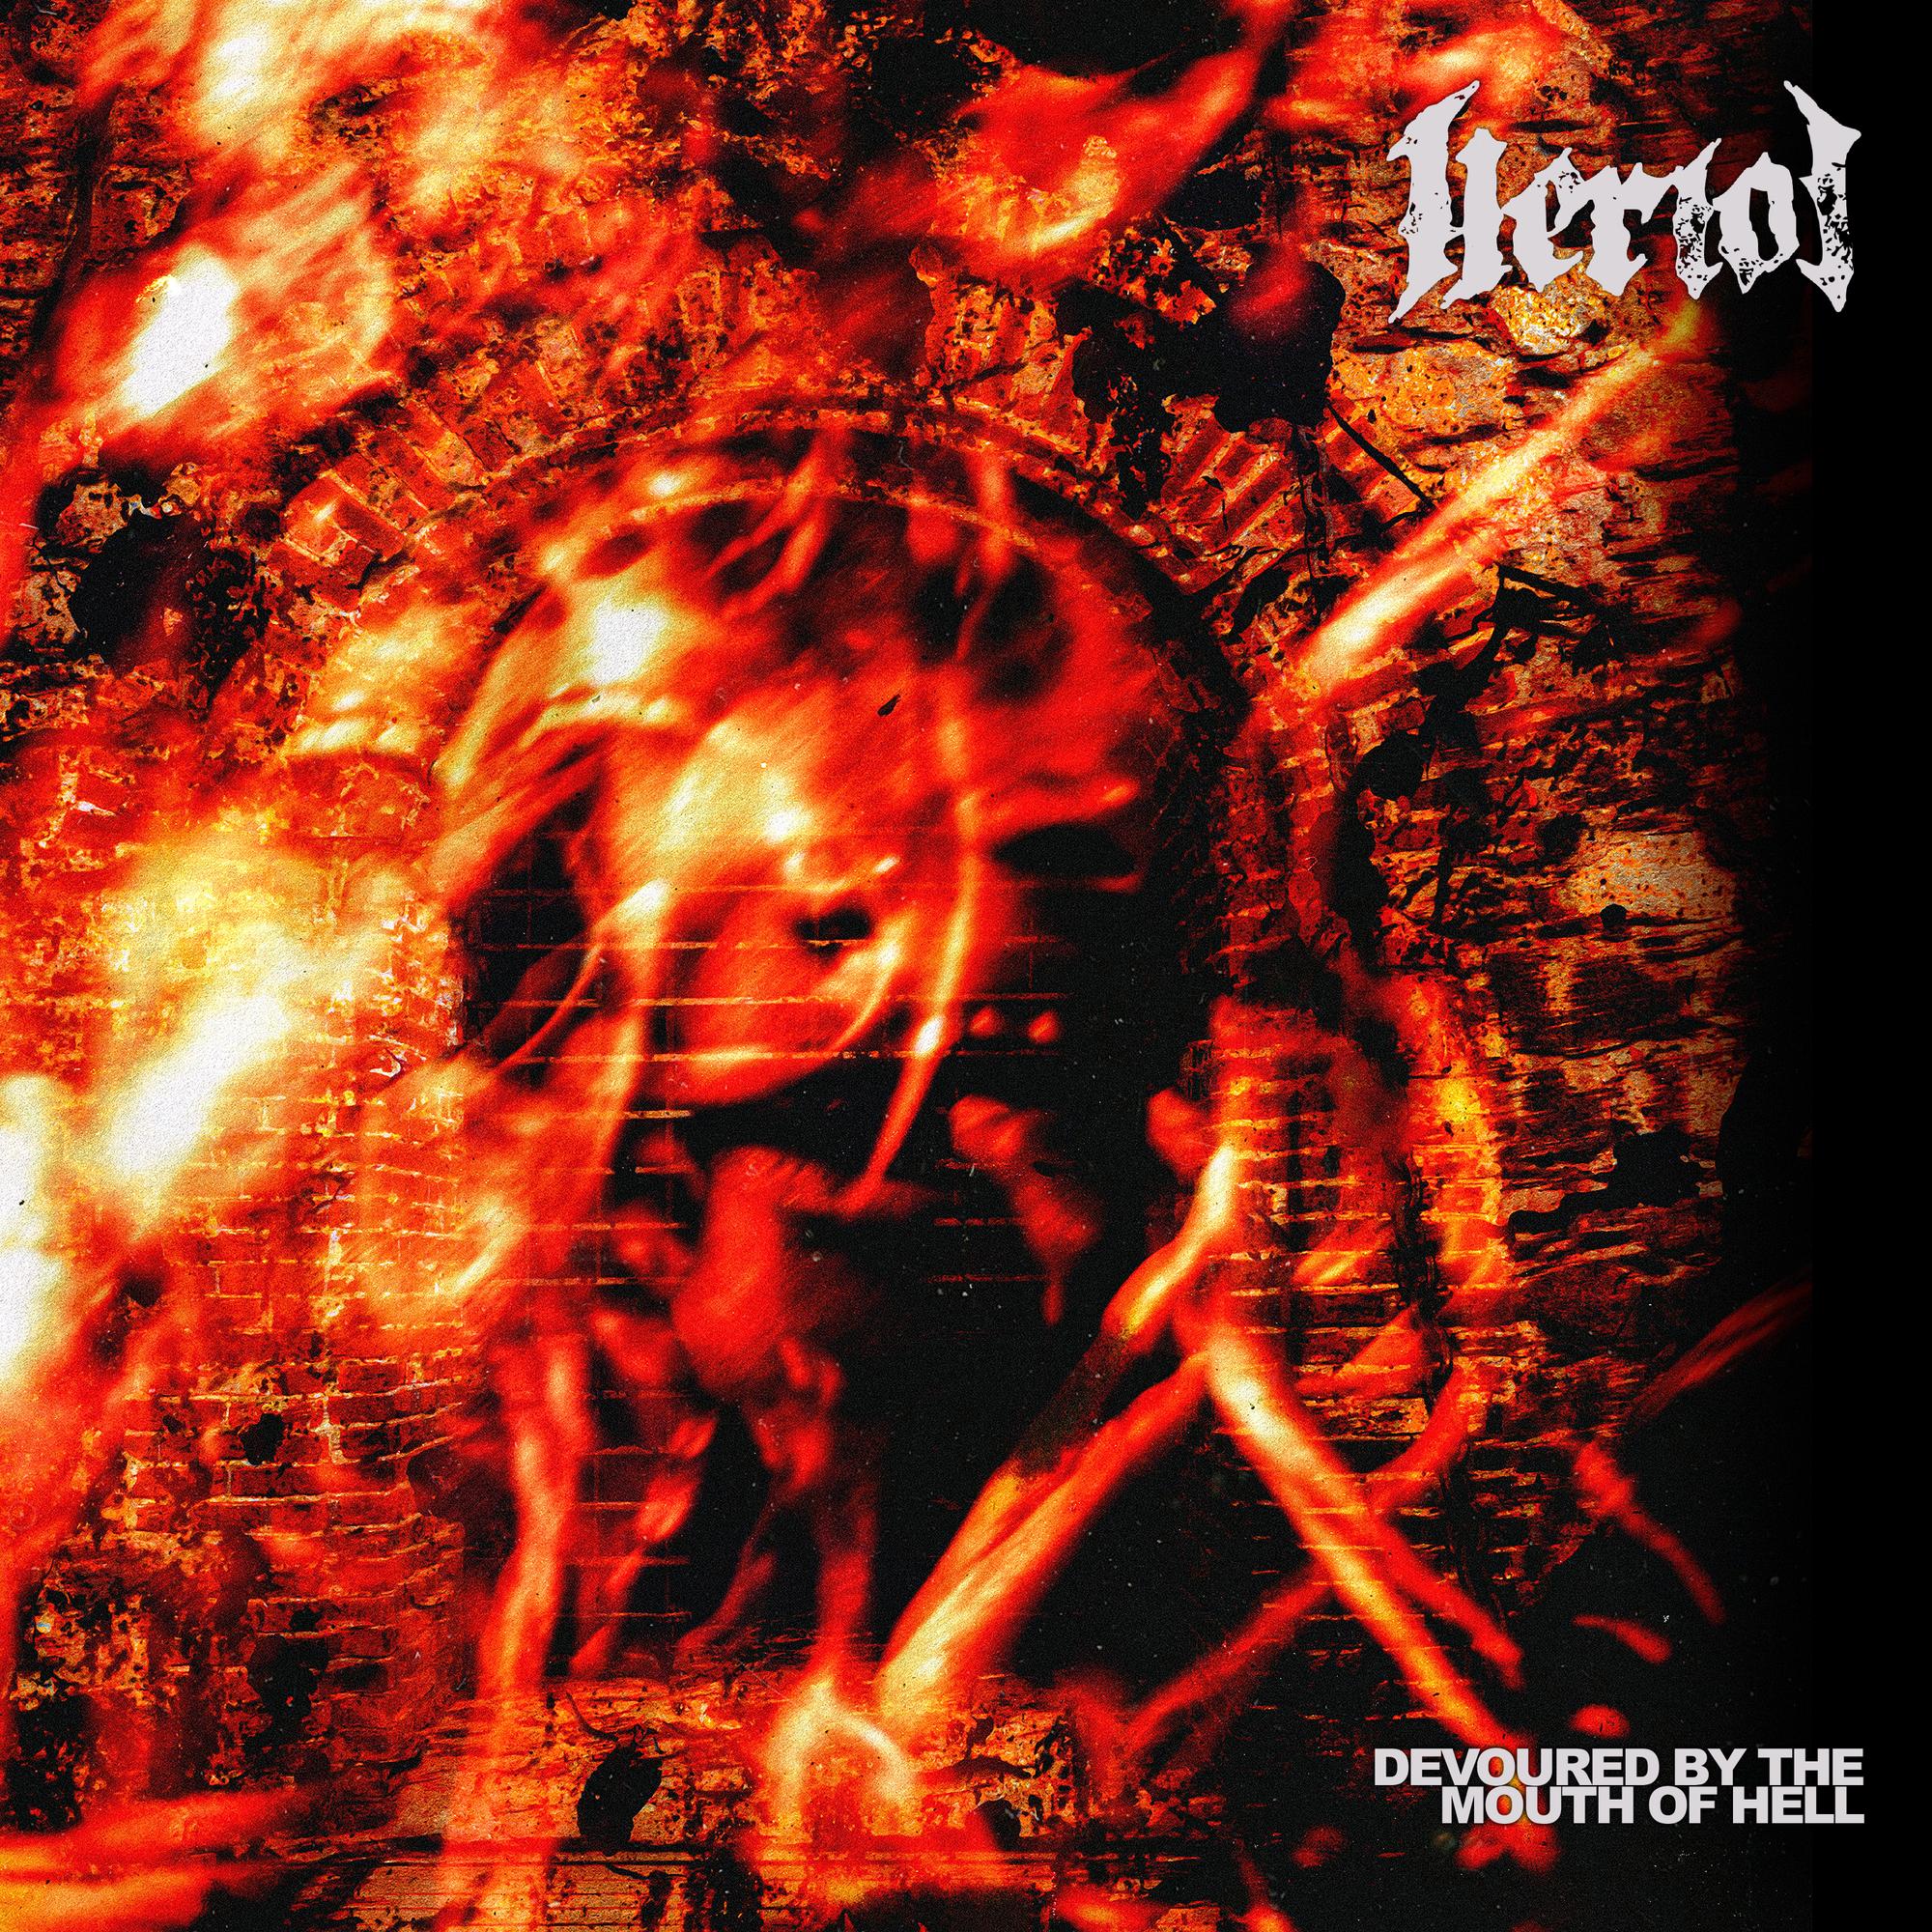 Heriot "Devoured By The Mouth Of Hell" Transparent Orange Vinyl - PRE-ORDER